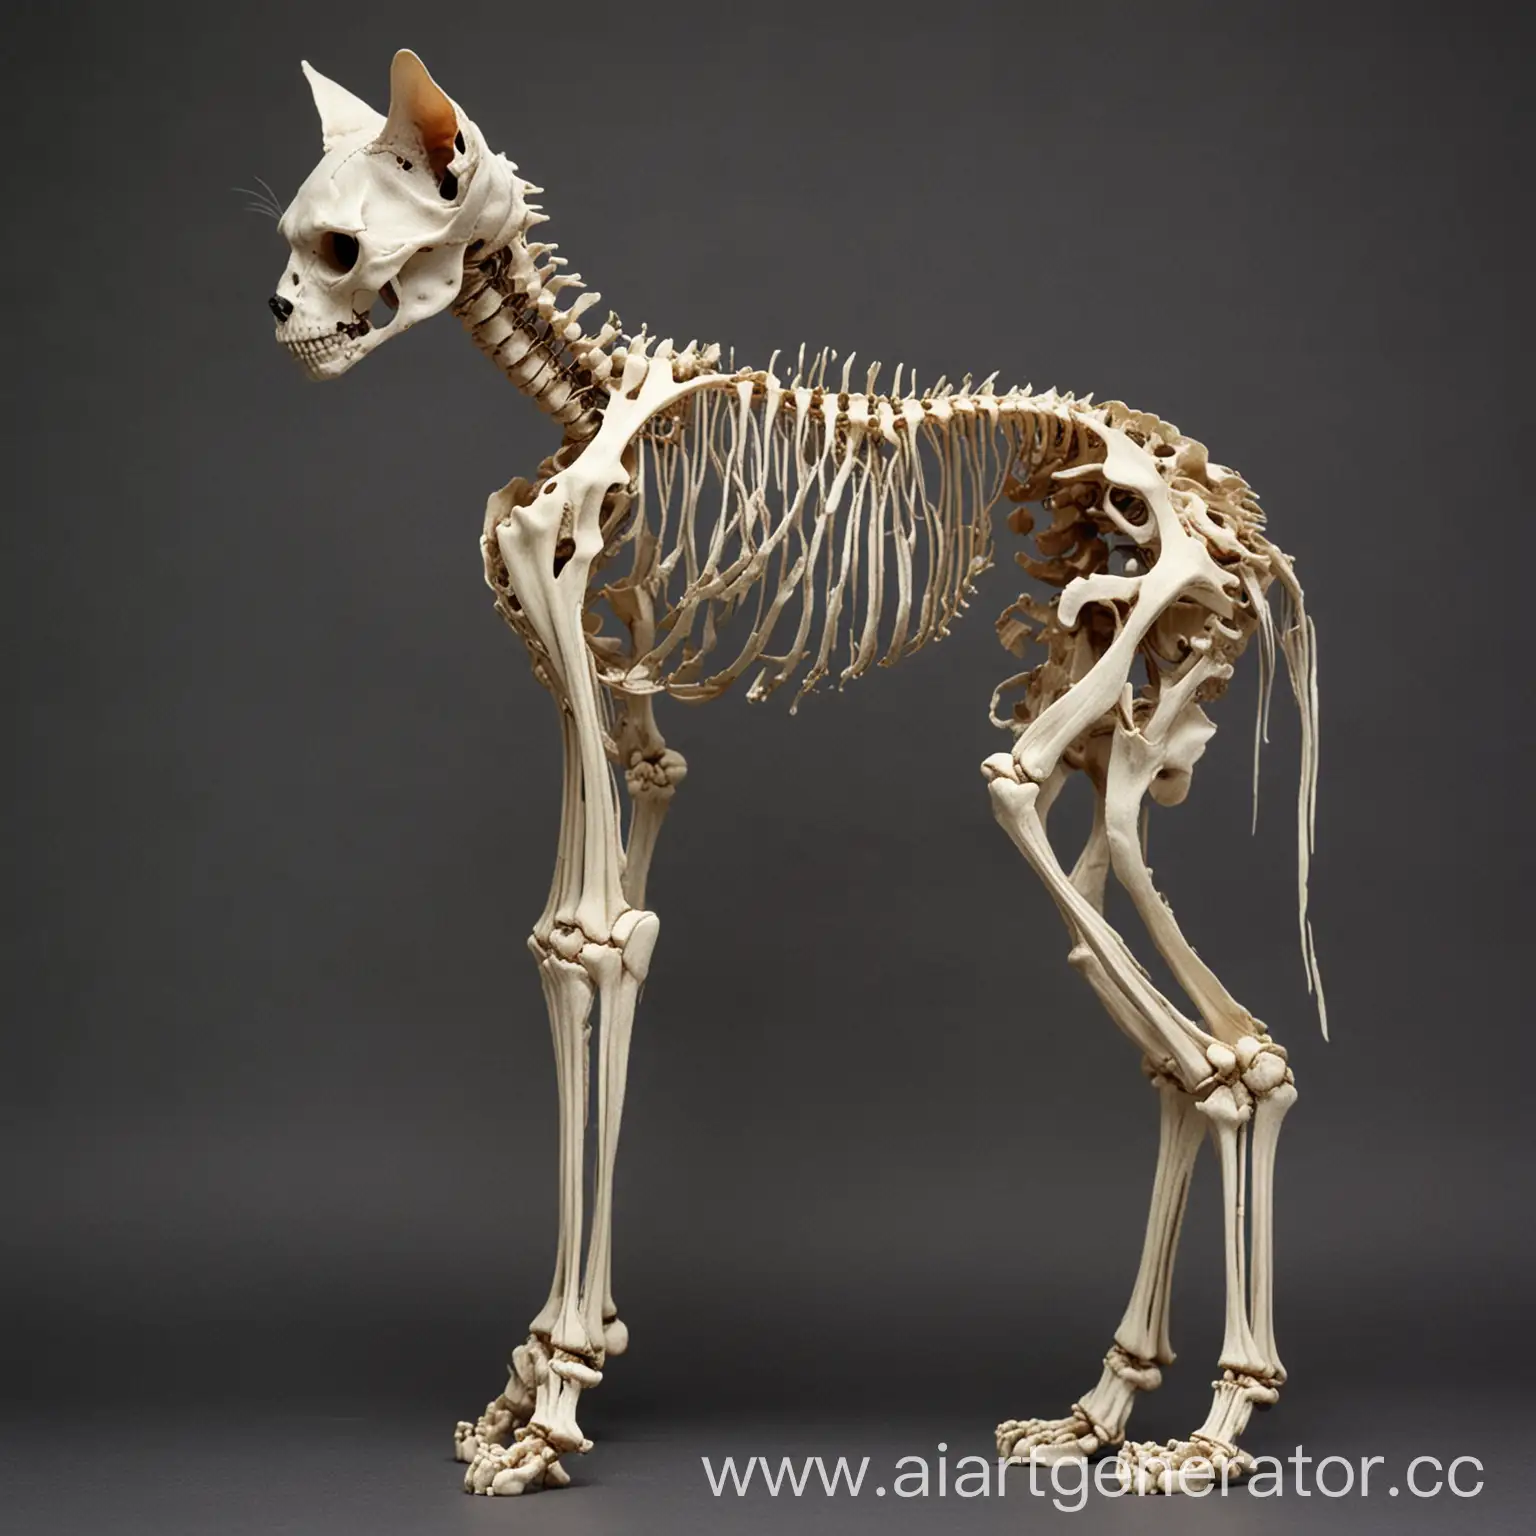 Human-Growth-Examined-through-Cat-Skeleton-Observation